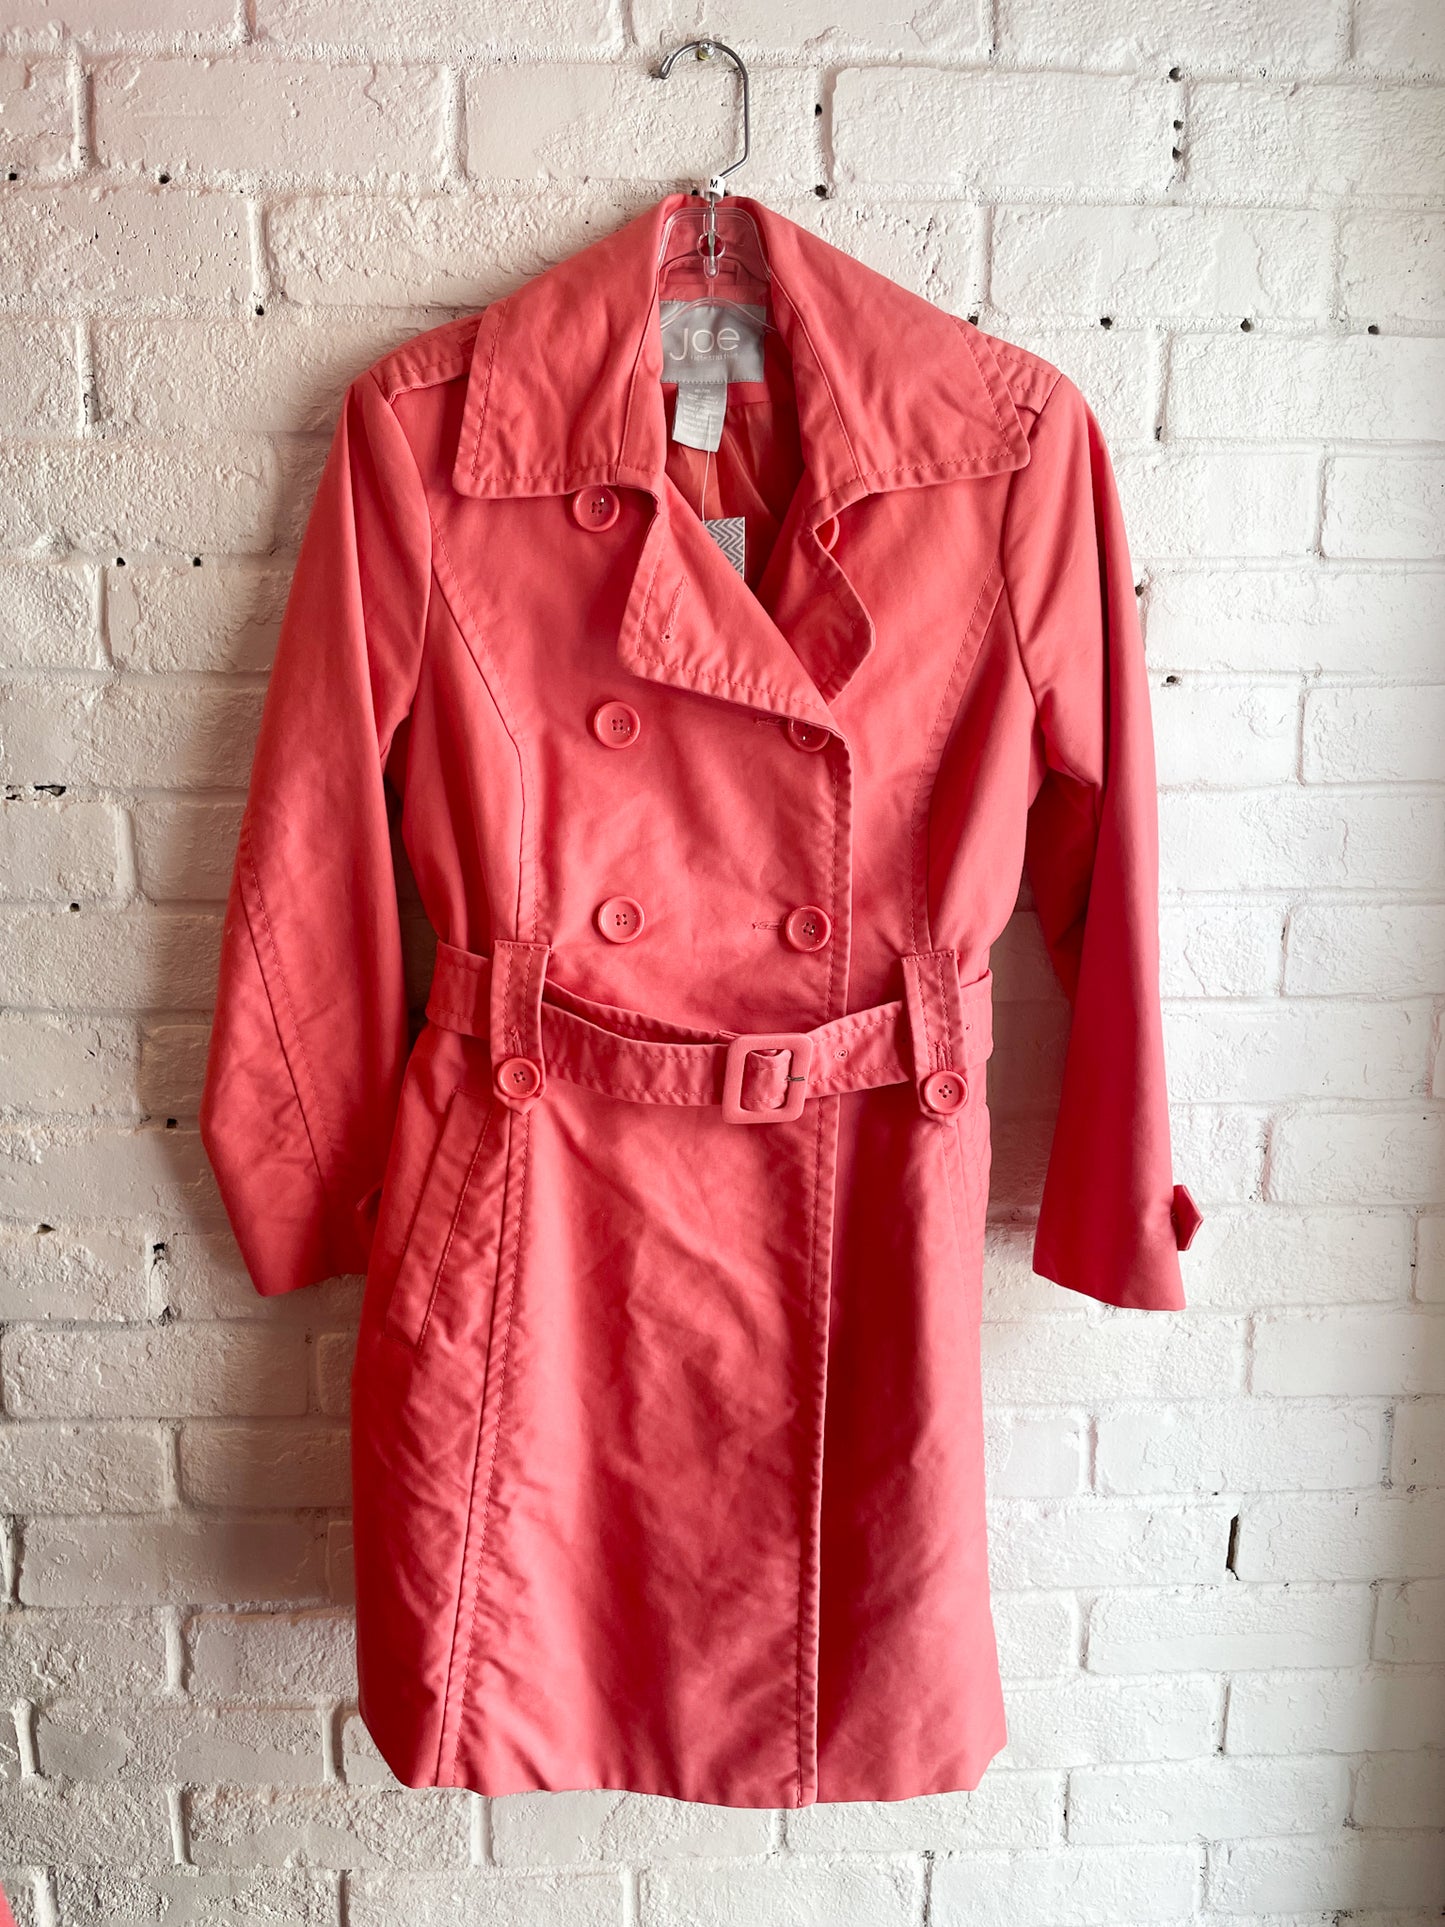 Joe Fresh Pink A-Line Cropped Sleeve Cotton Trench Coat - Small